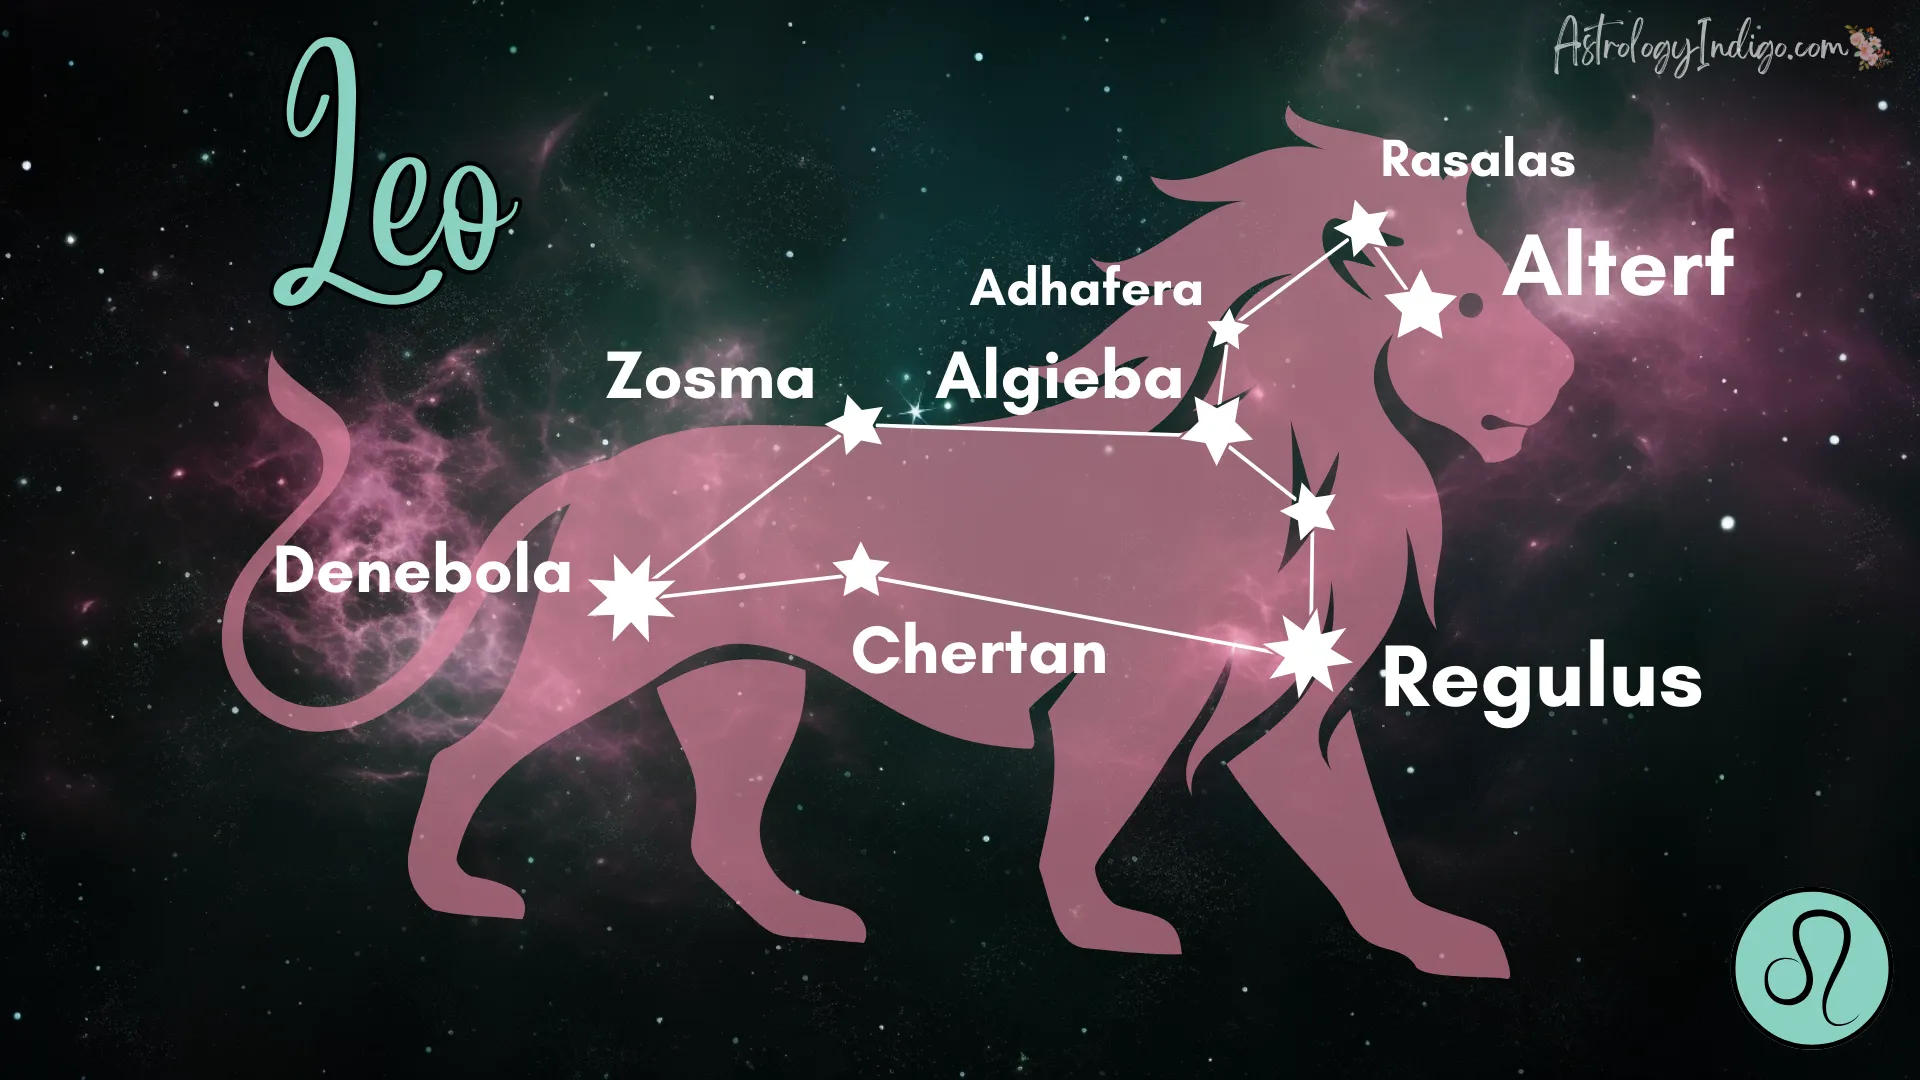 The Leo constellation with information about the stars and a pink image of a Lion behind it.